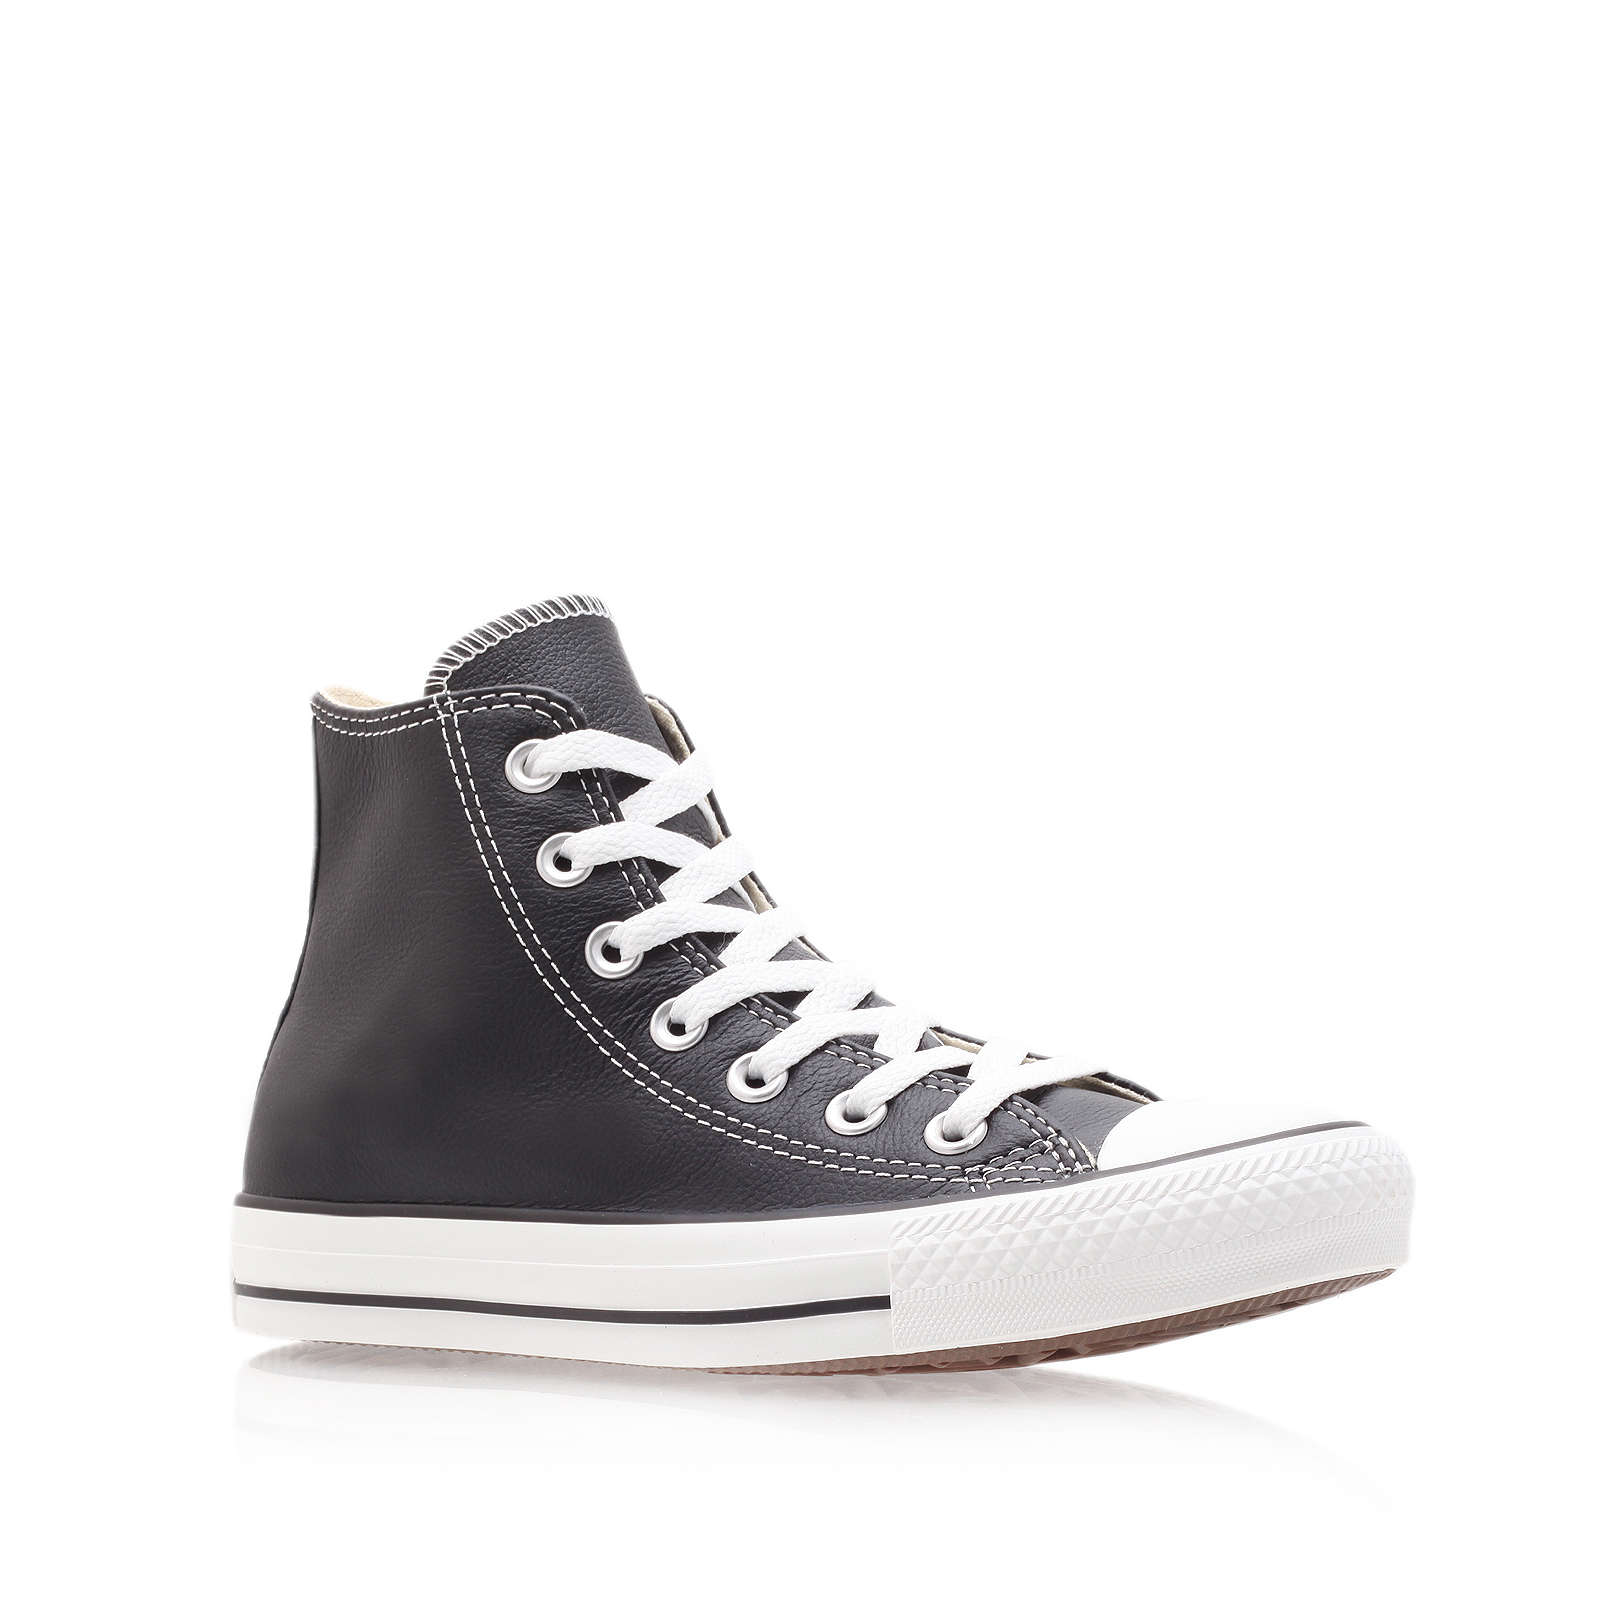 CT LEATHER HI Converse Ct Leather Hi Black Casuals by CONVERSE